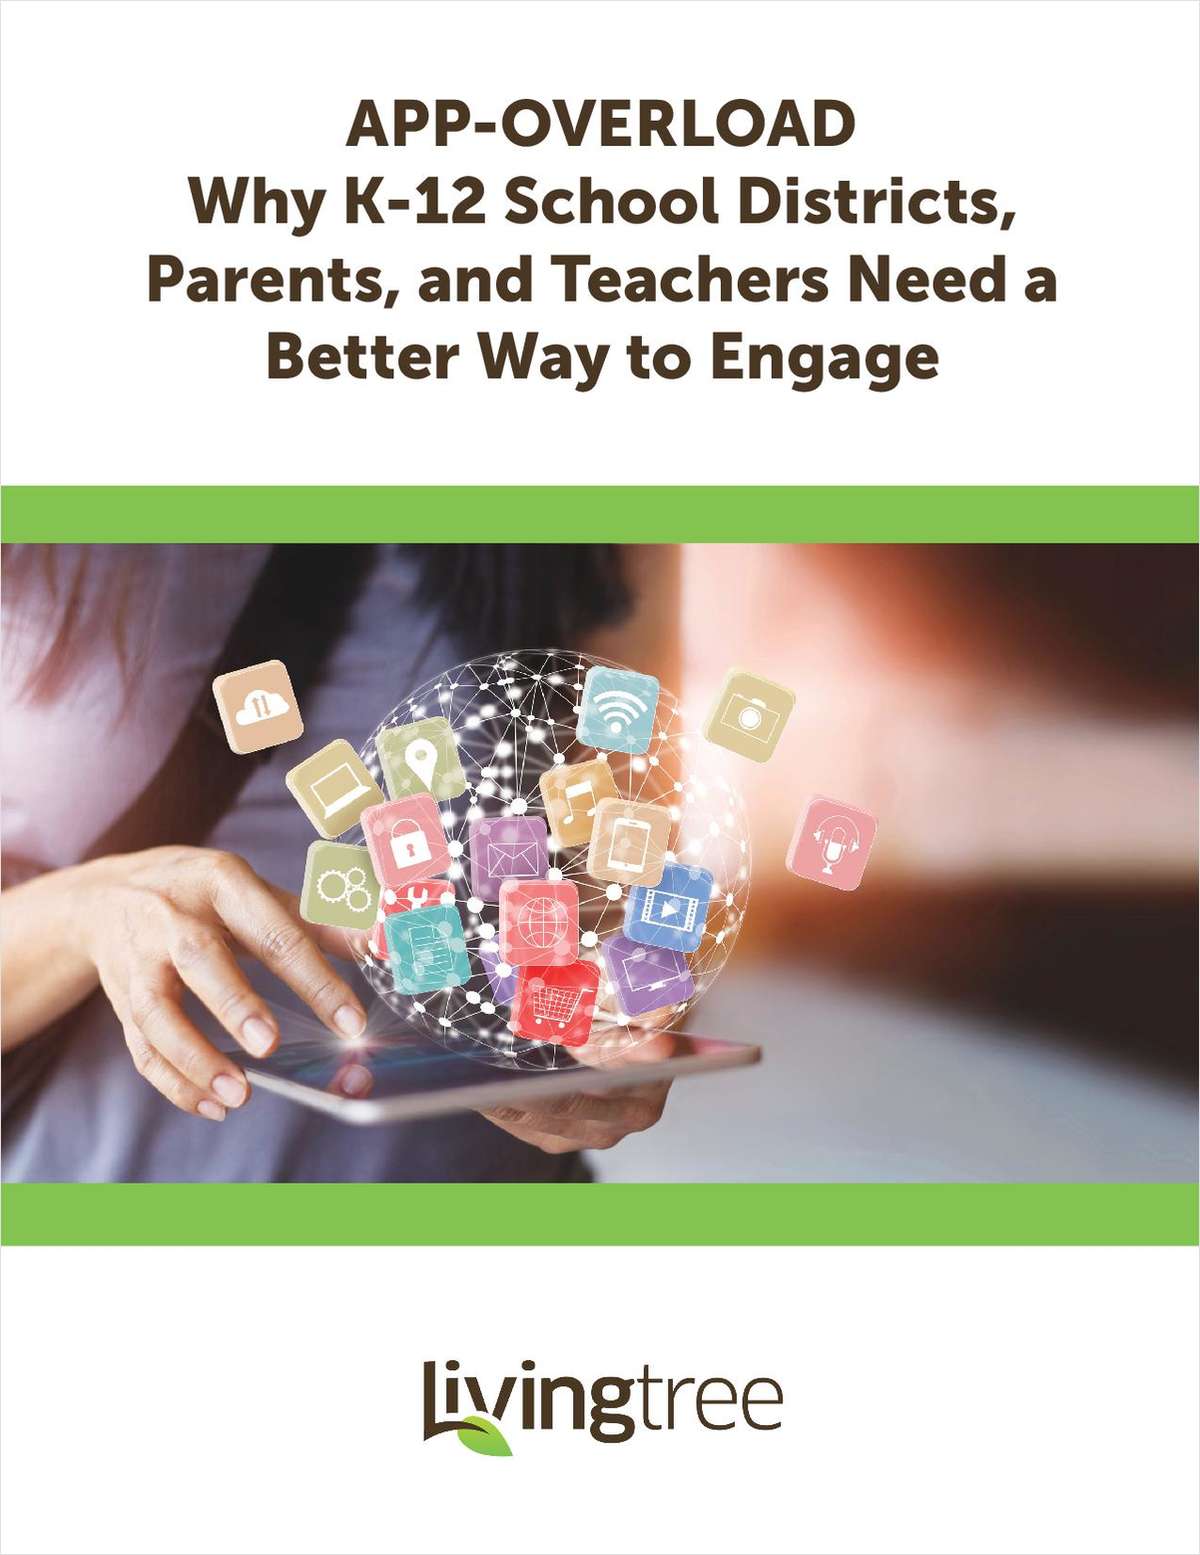 APP-OVERLOAD Why K-12 School Districts, Parents, and Teachers Need a Better Way to Engage